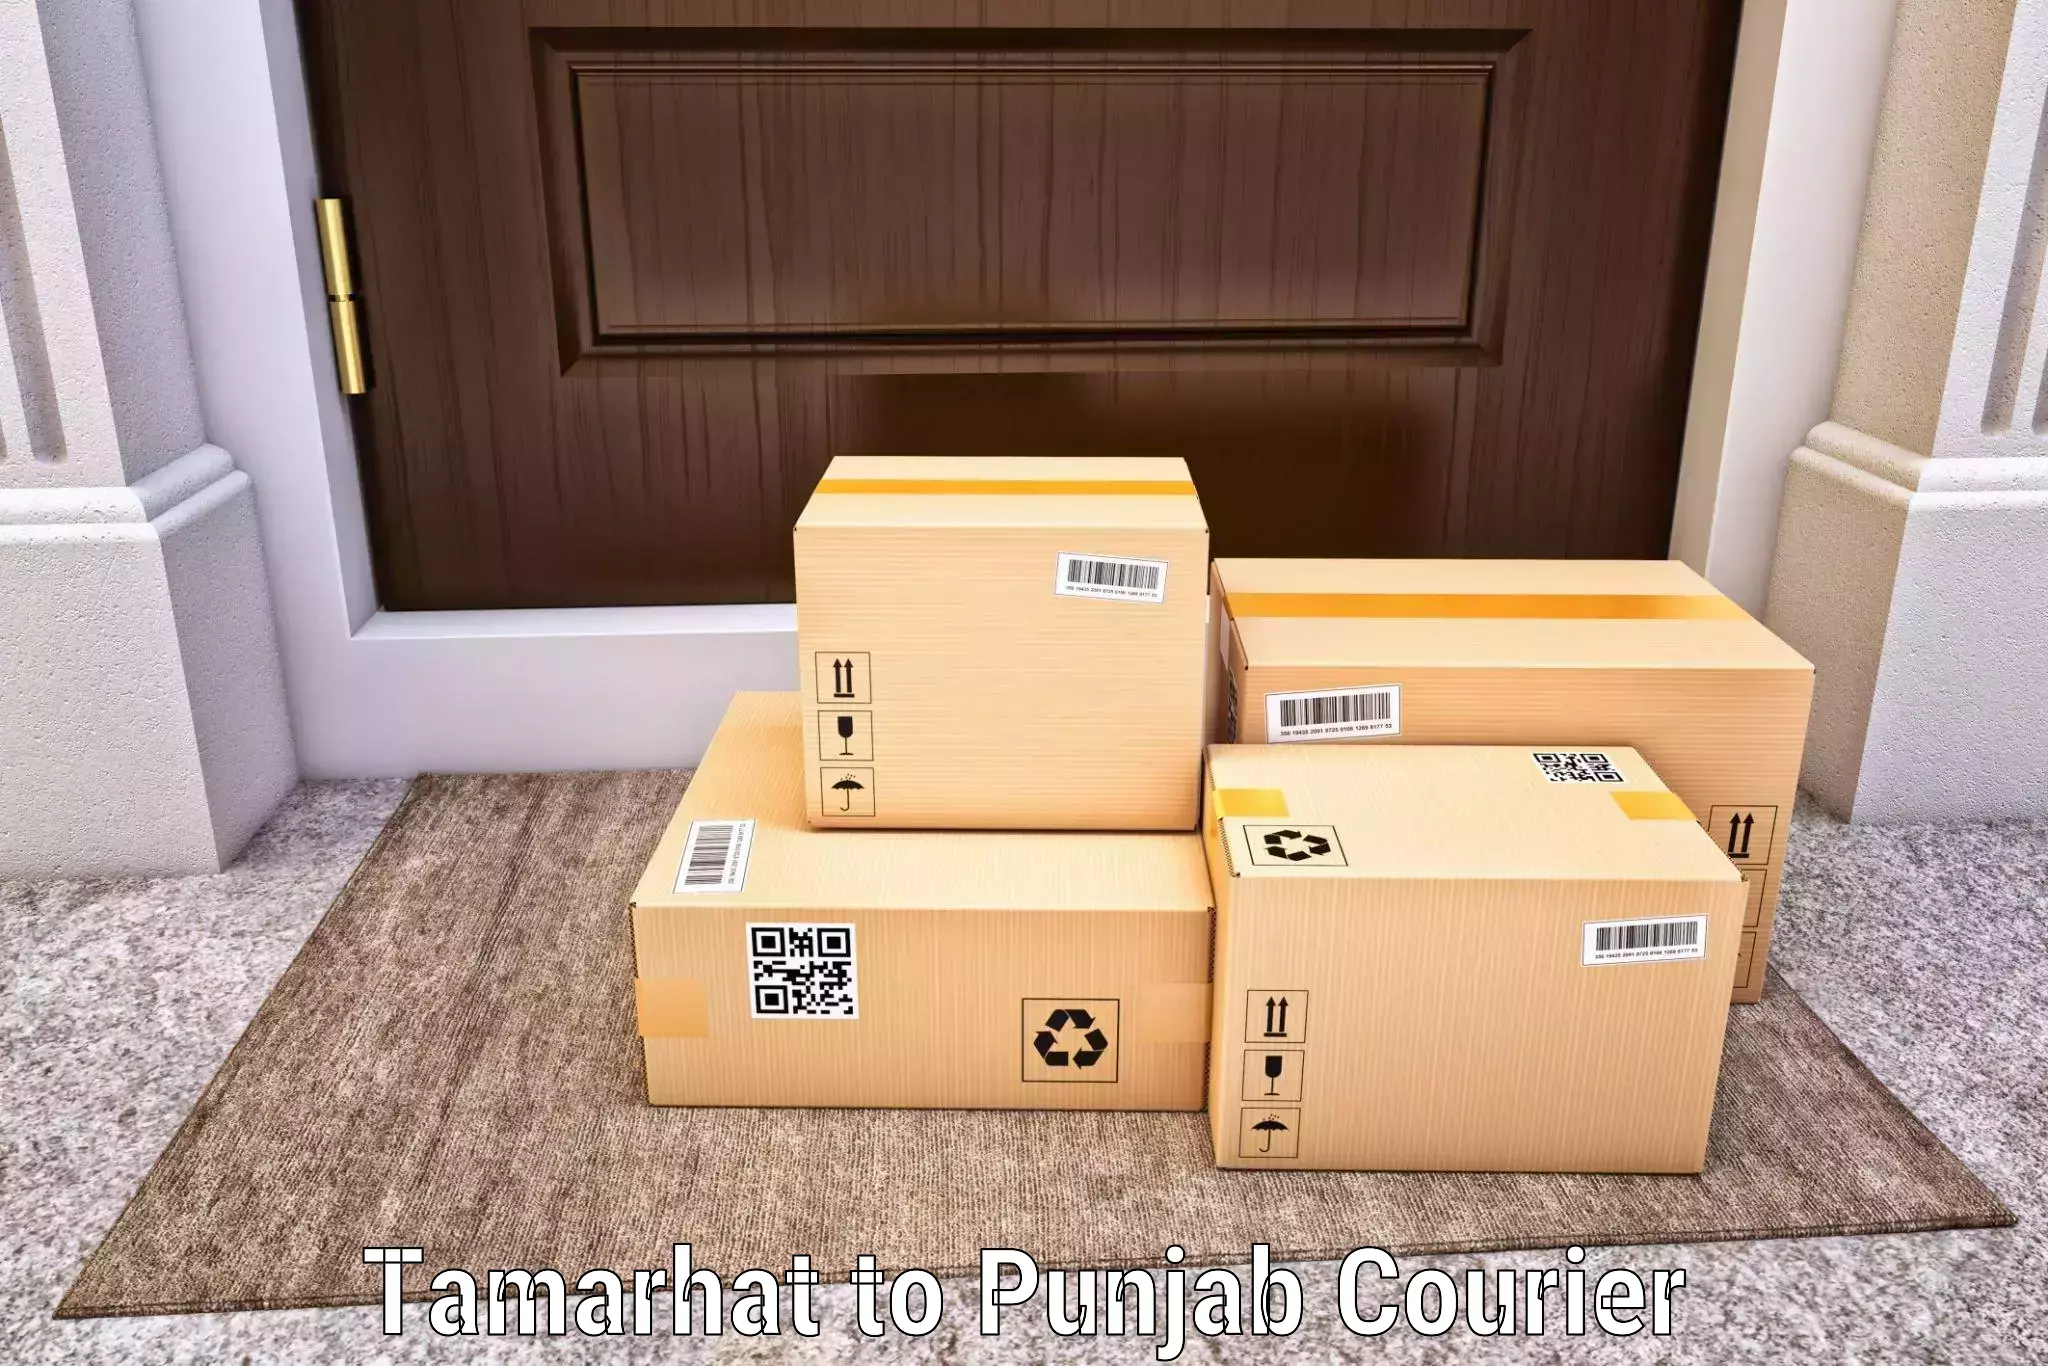 Rural area delivery Tamarhat to Patiala